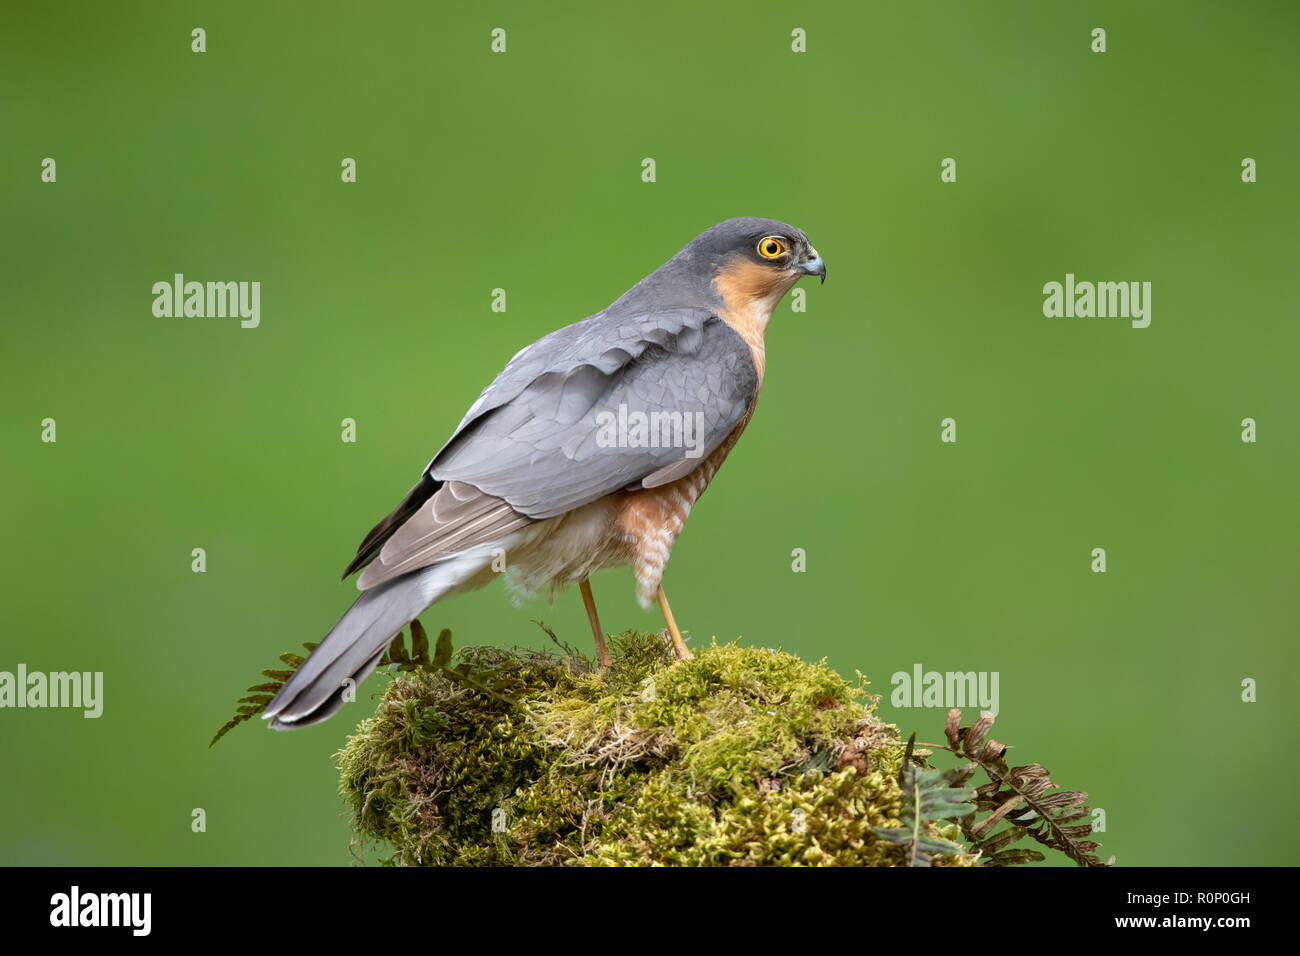 Adult male Sparrowhawk (Accipitor nisus) on a mossy tree stump, Scotland Stock Photo